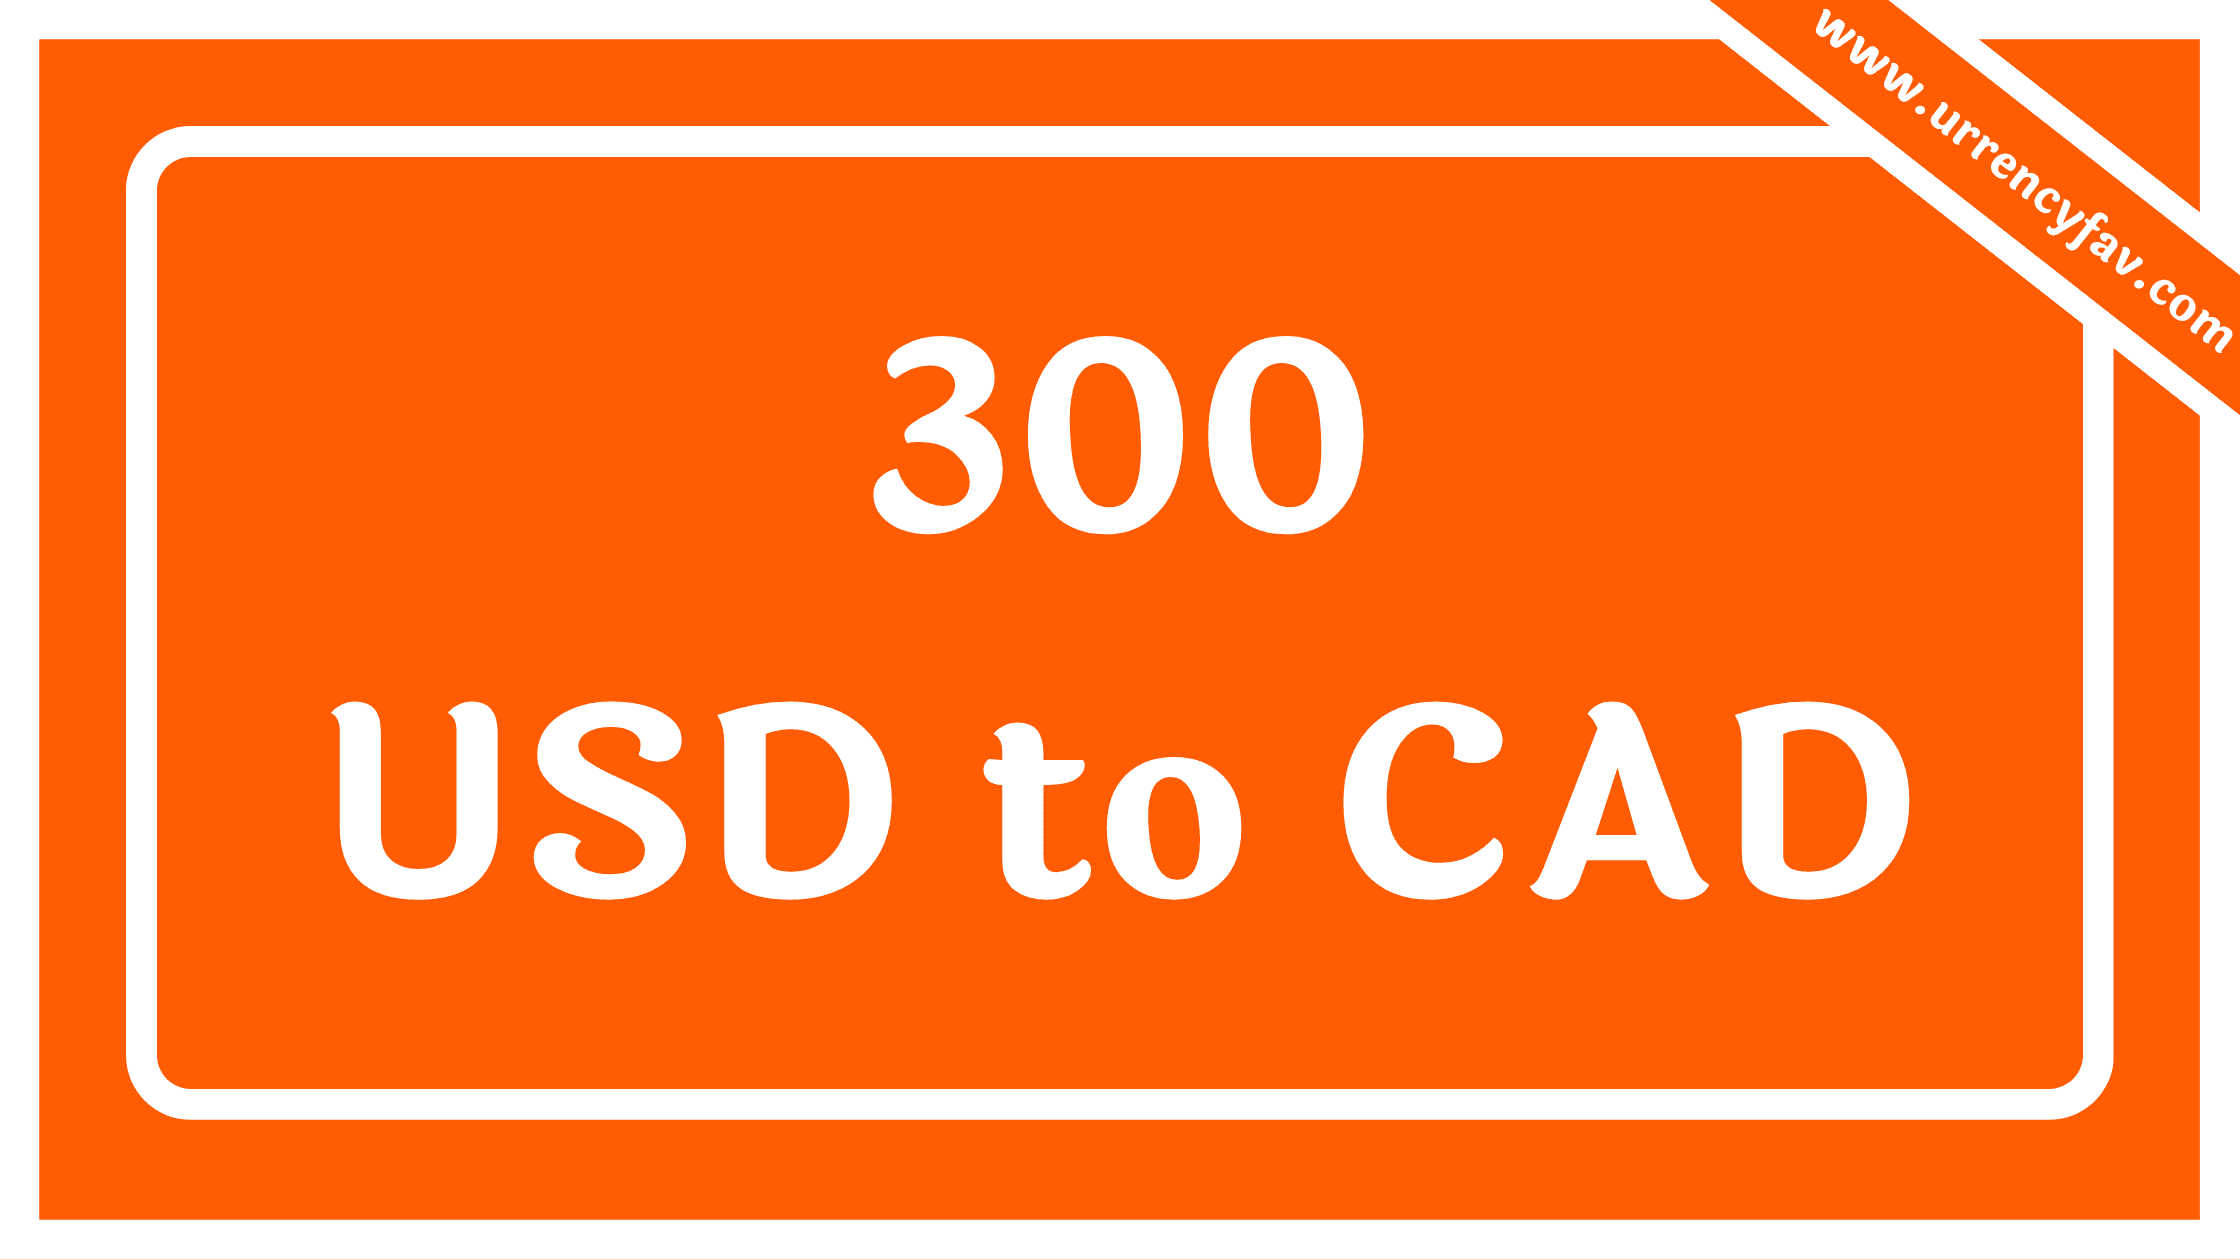 300 USD to CAD